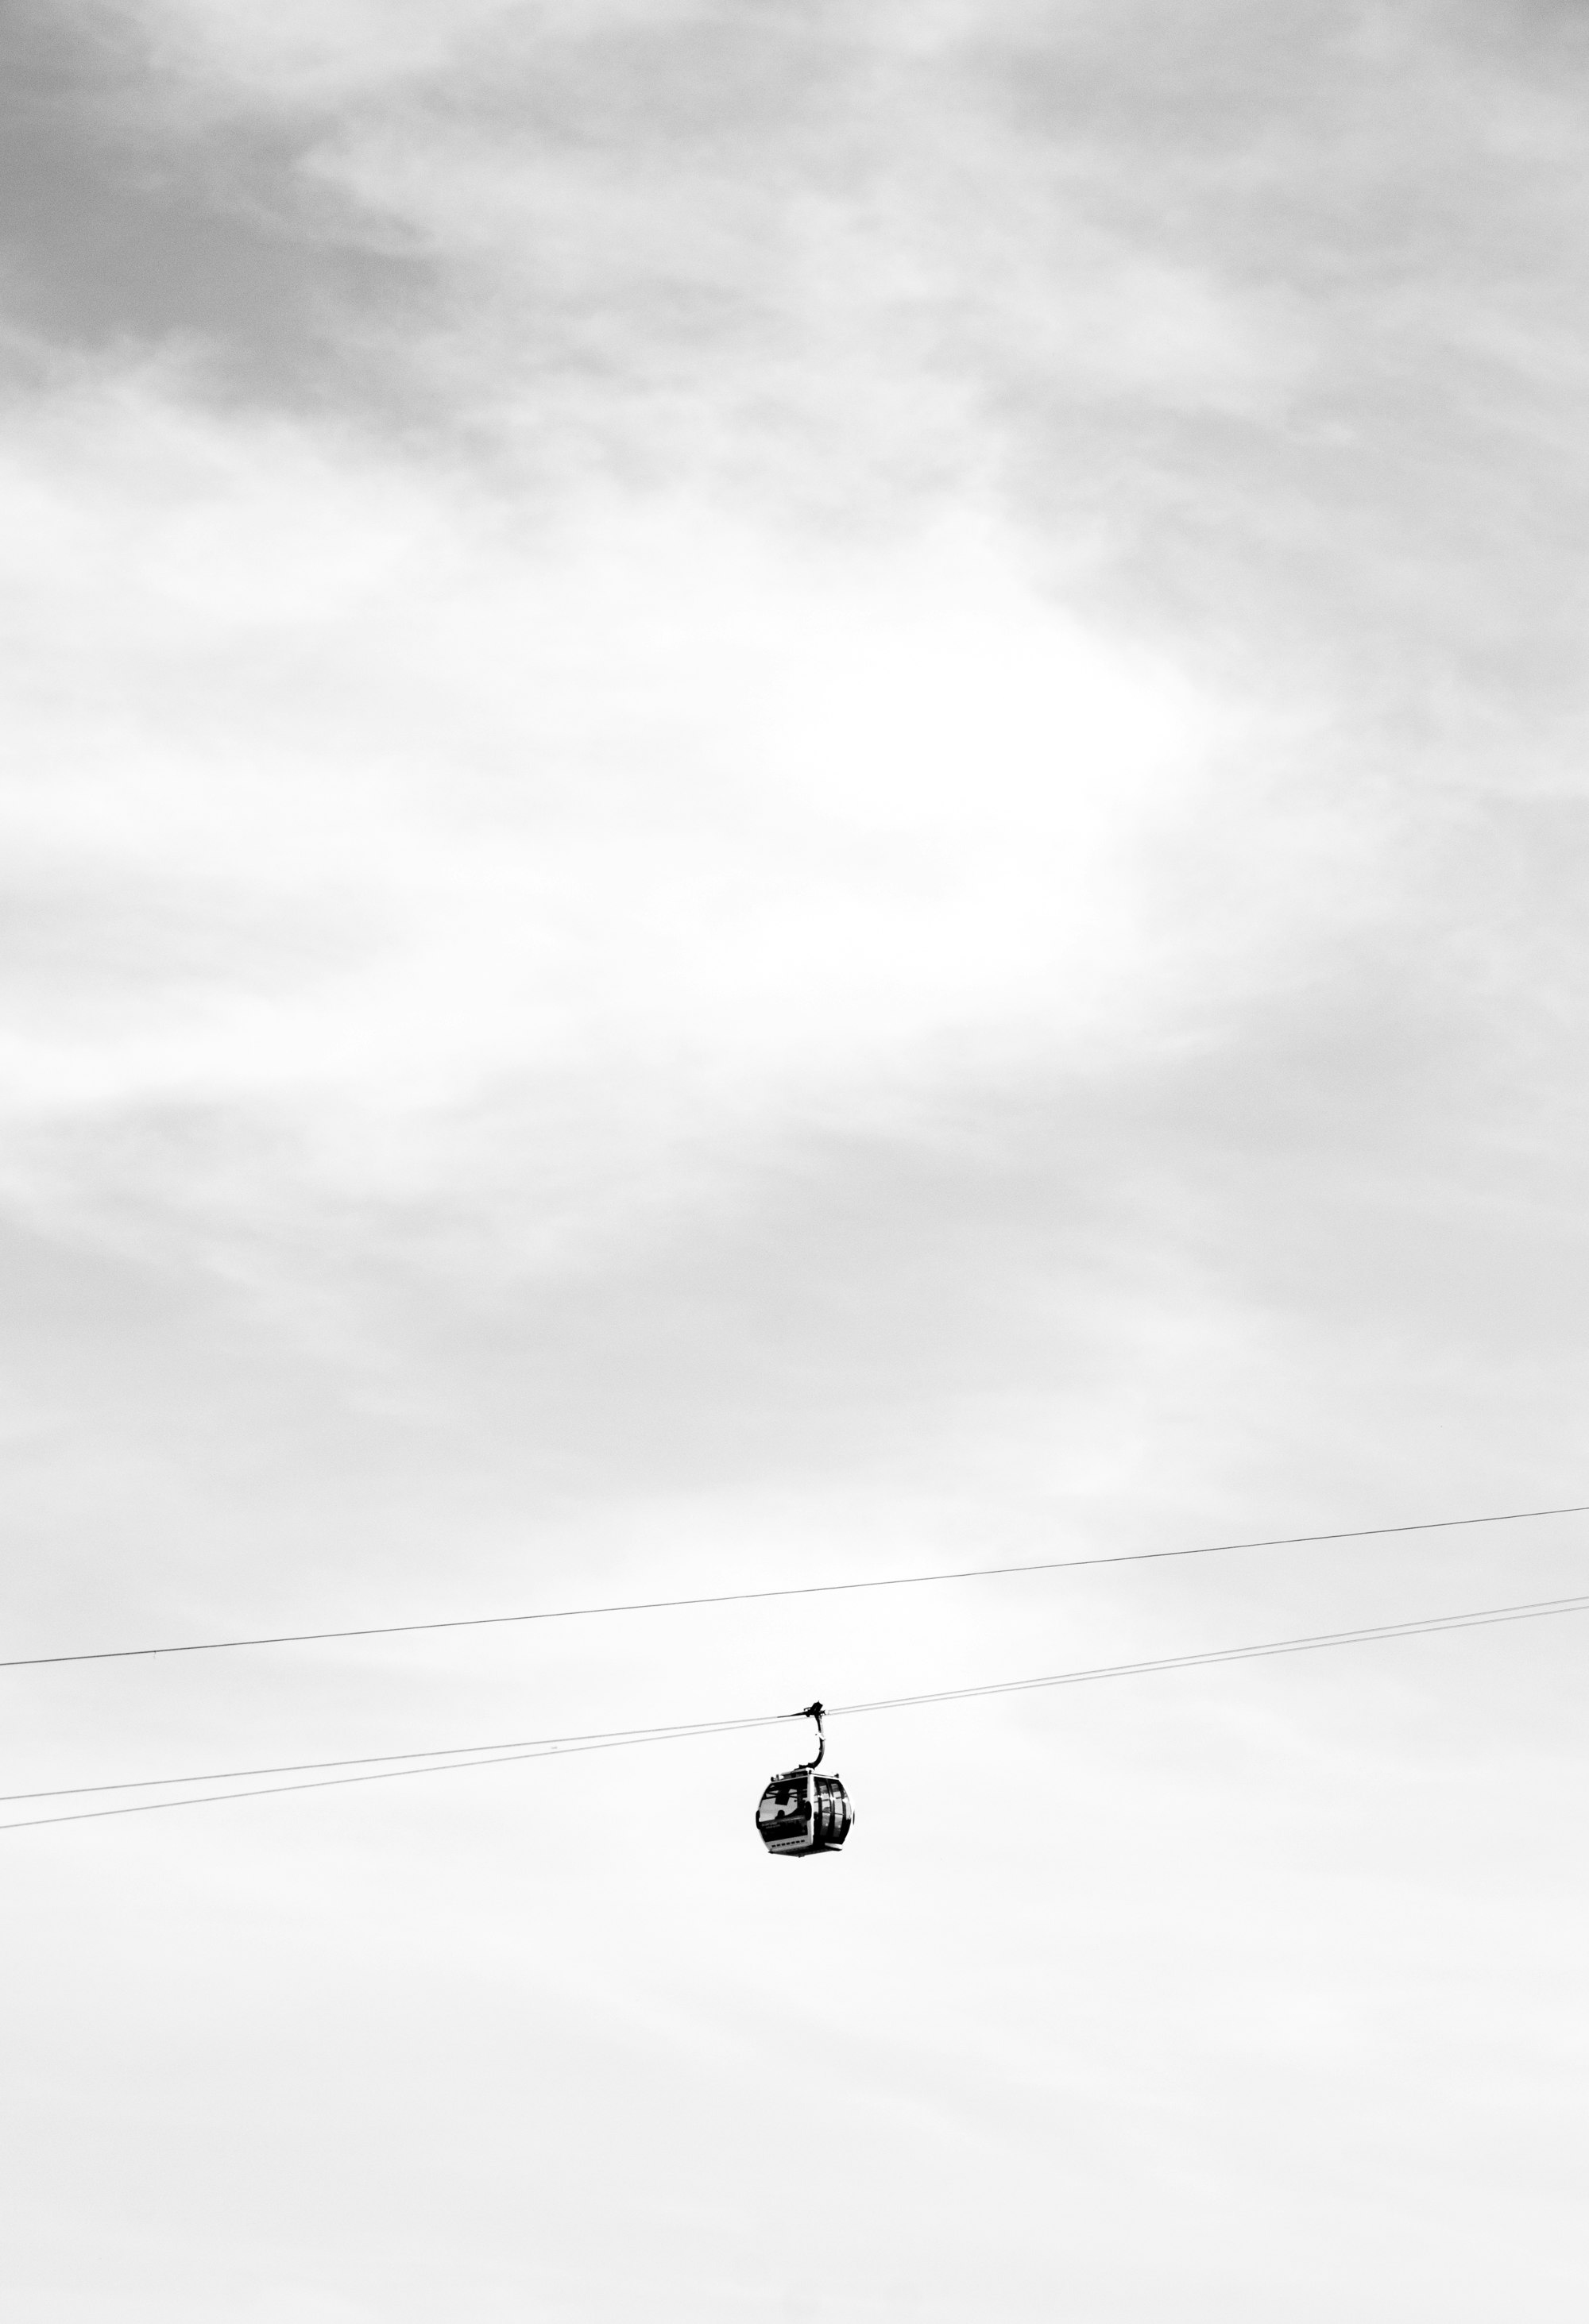 black cable car under white clouds